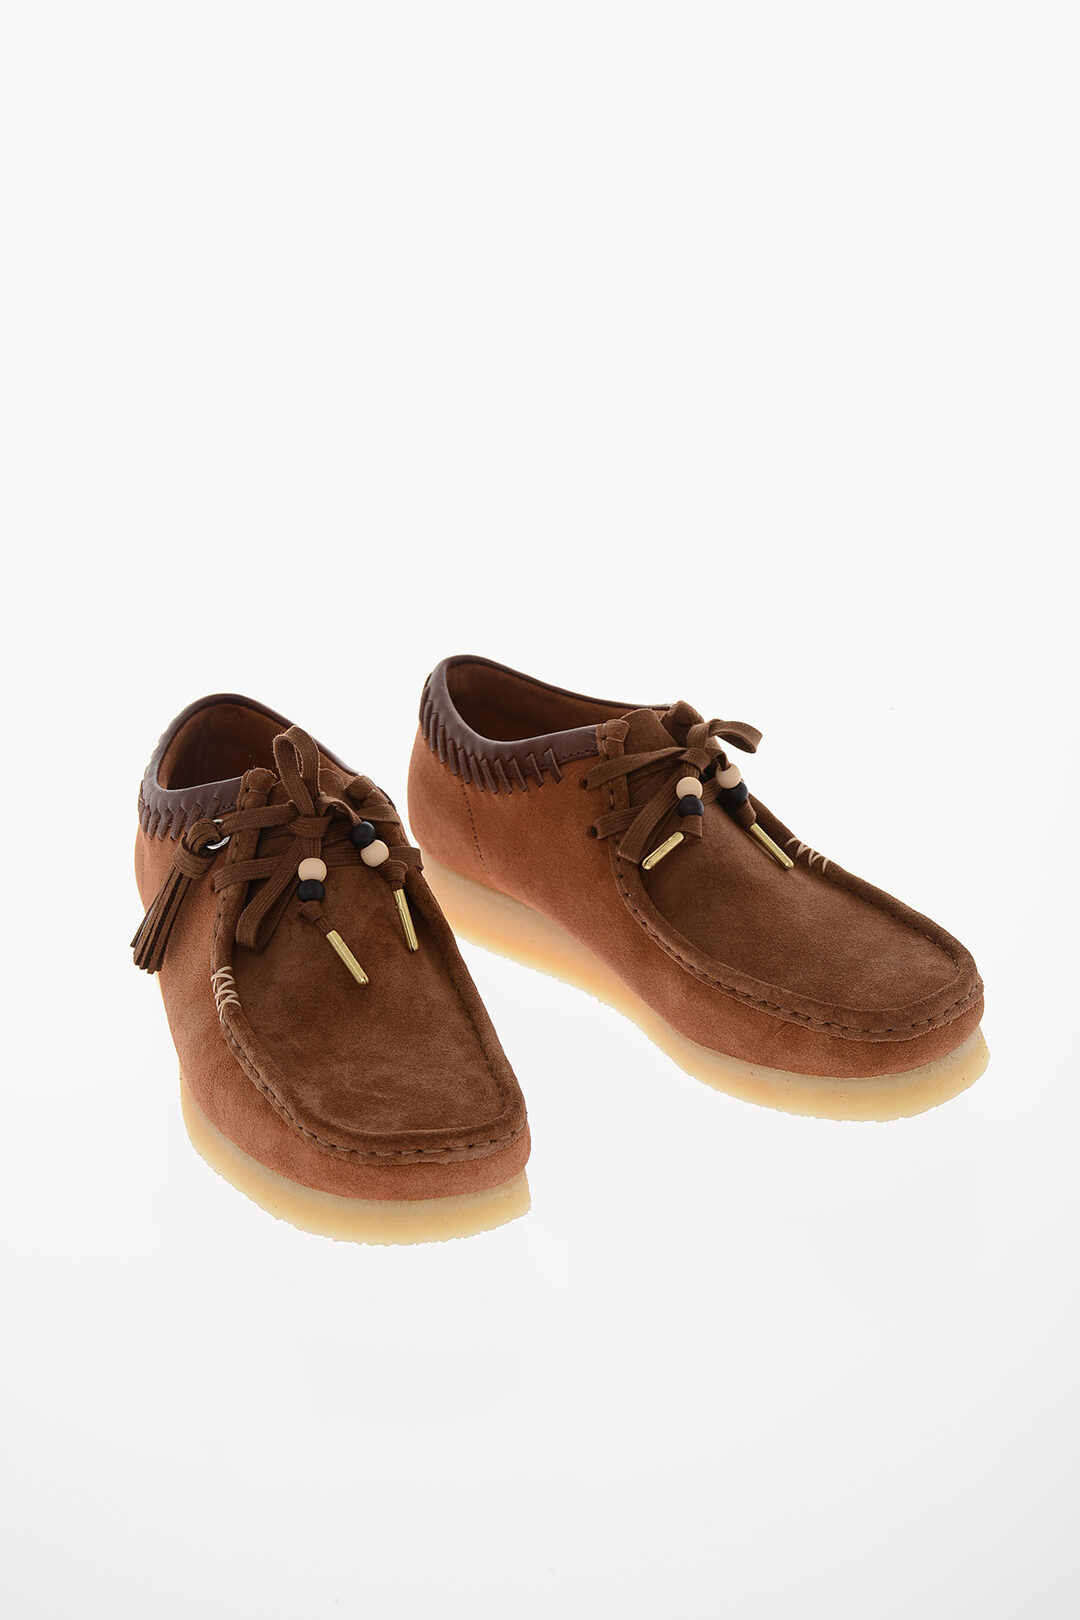 Clarks Suede WALLABEE Desert Boots with Crepe Sole men - Glamood Outlet